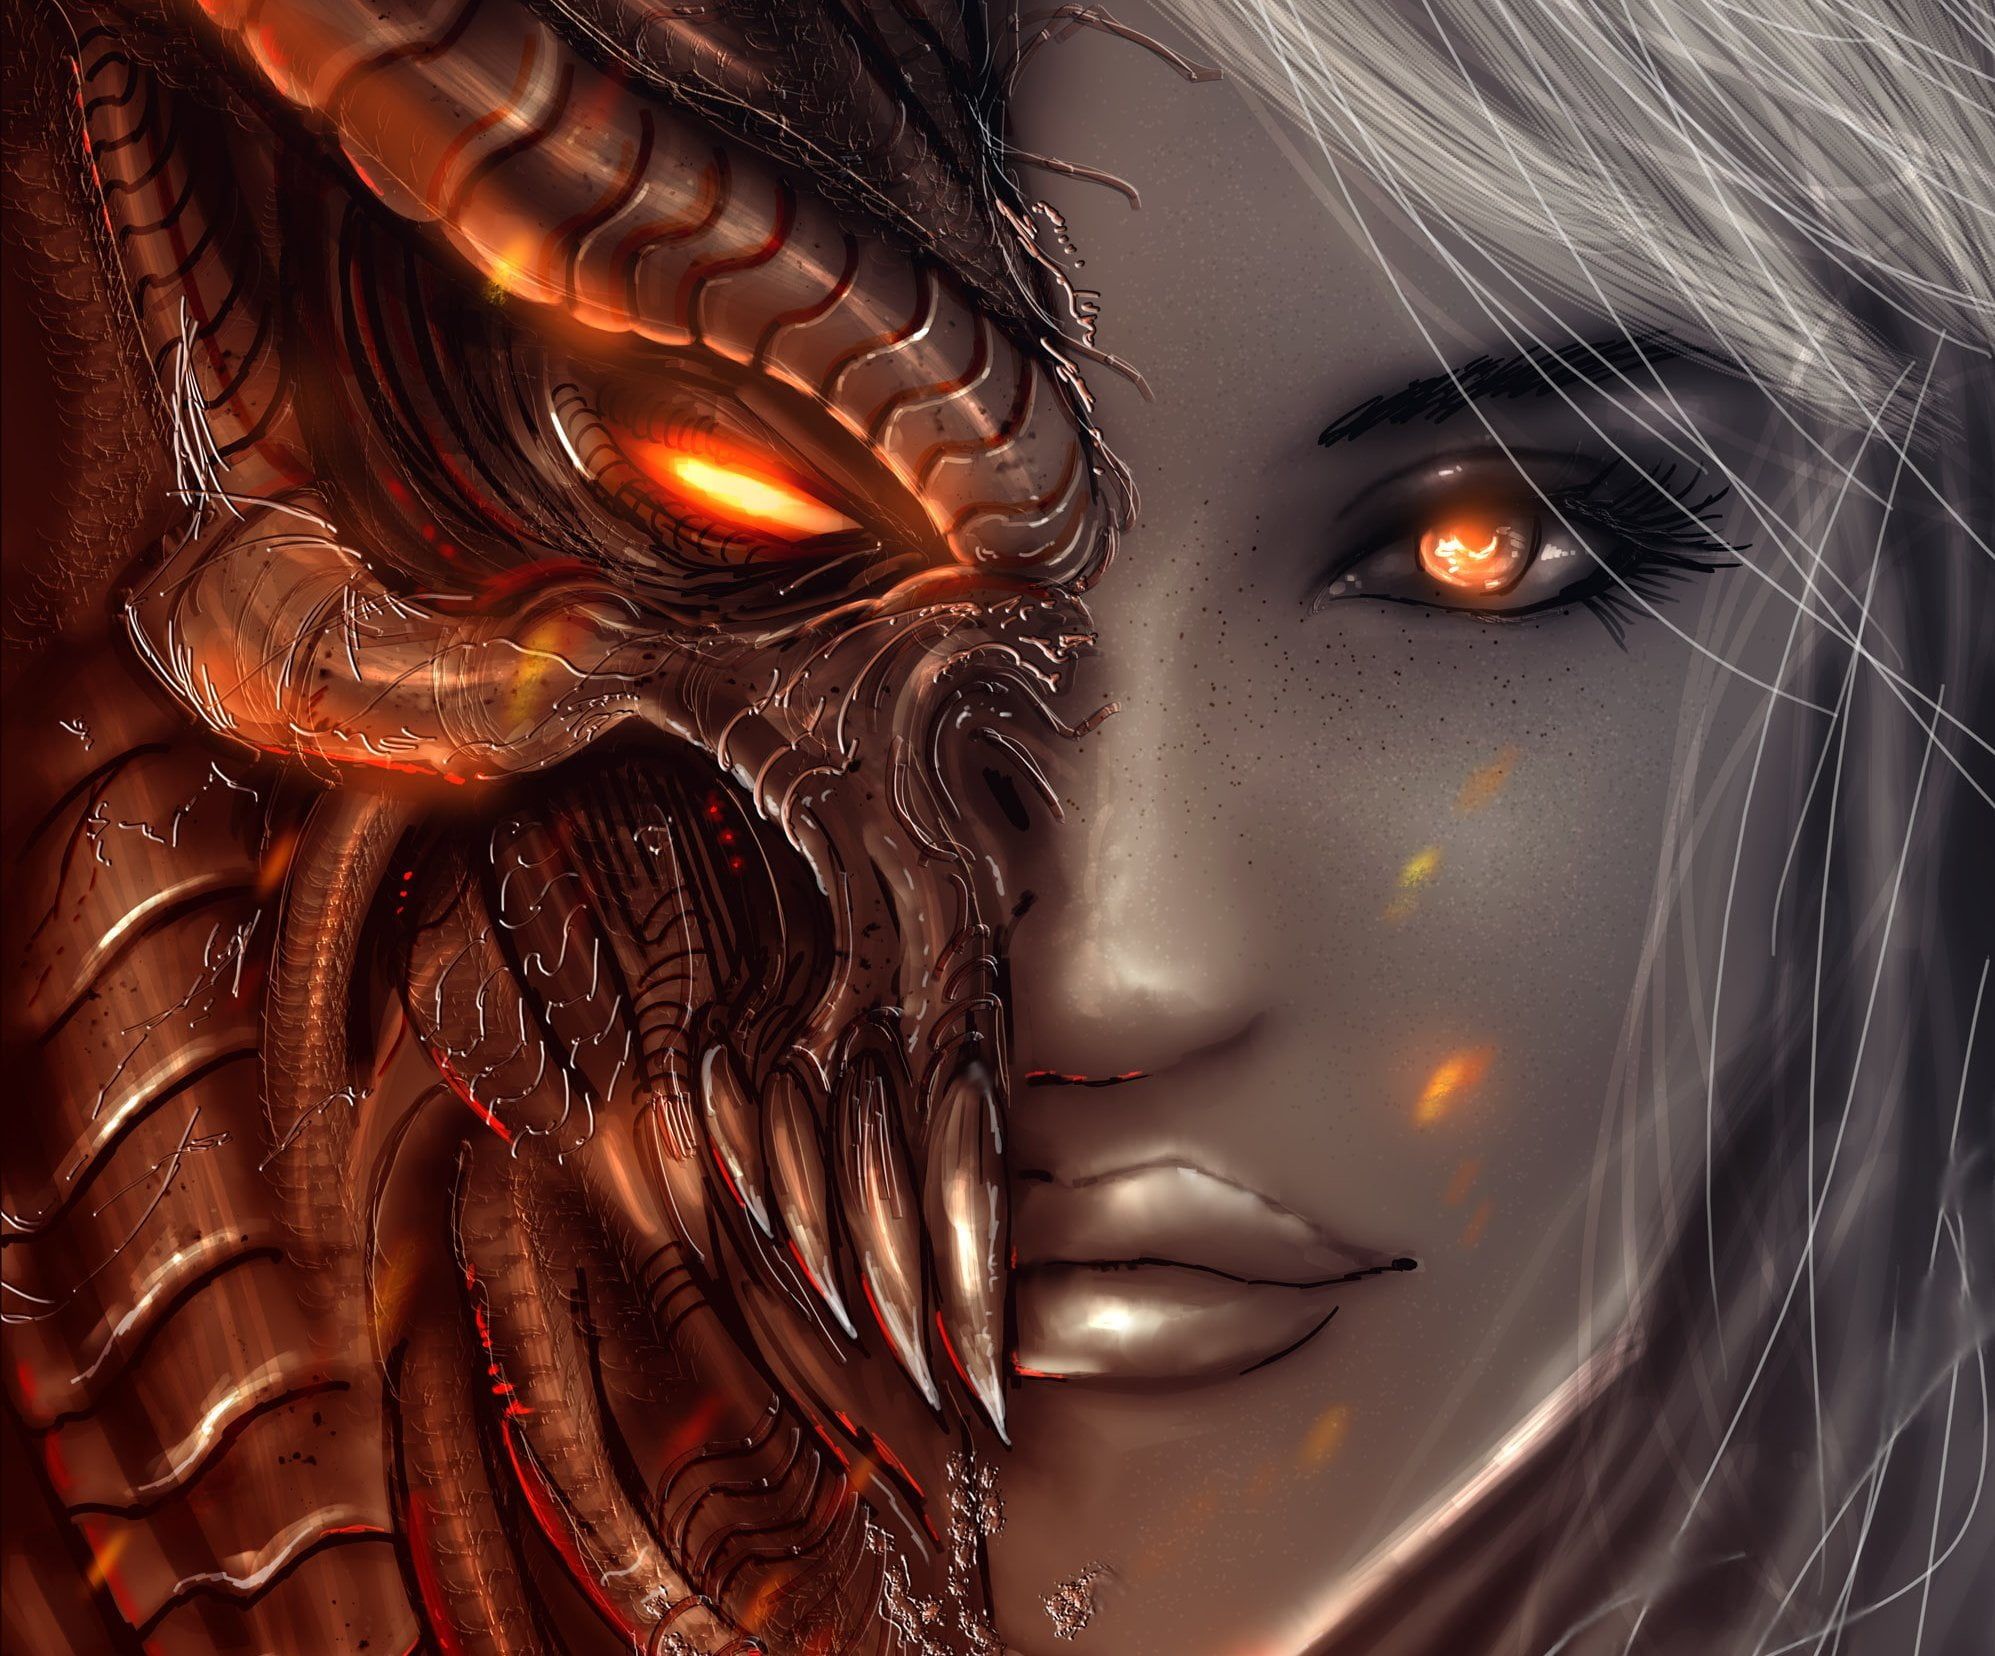 Lady with gray hair and half demon face anime illustration HD